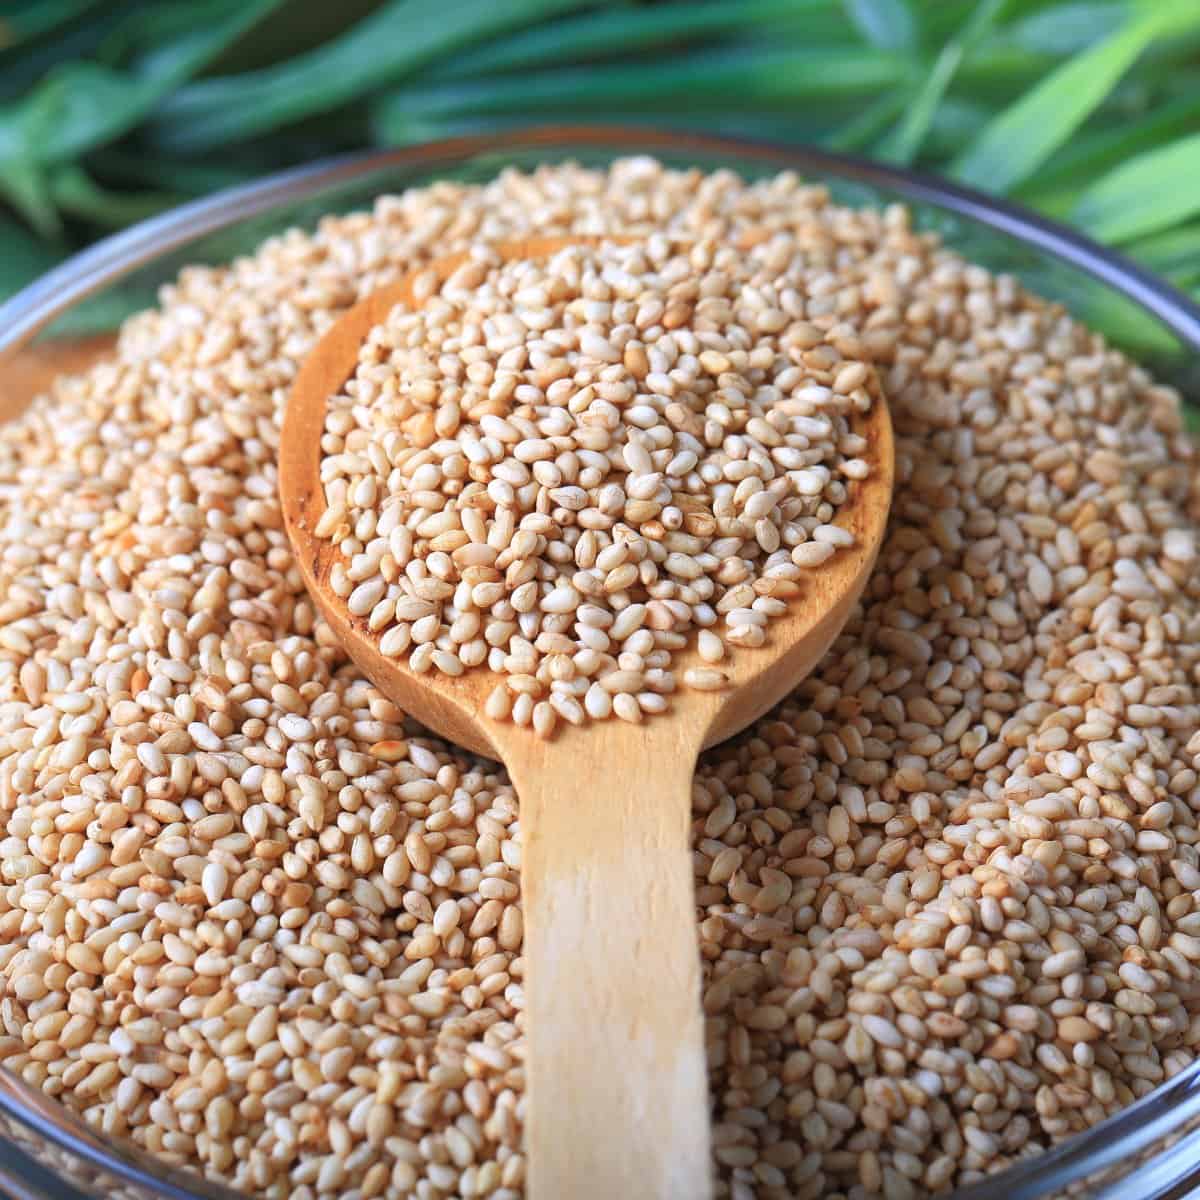 How to cook with sesame seeds